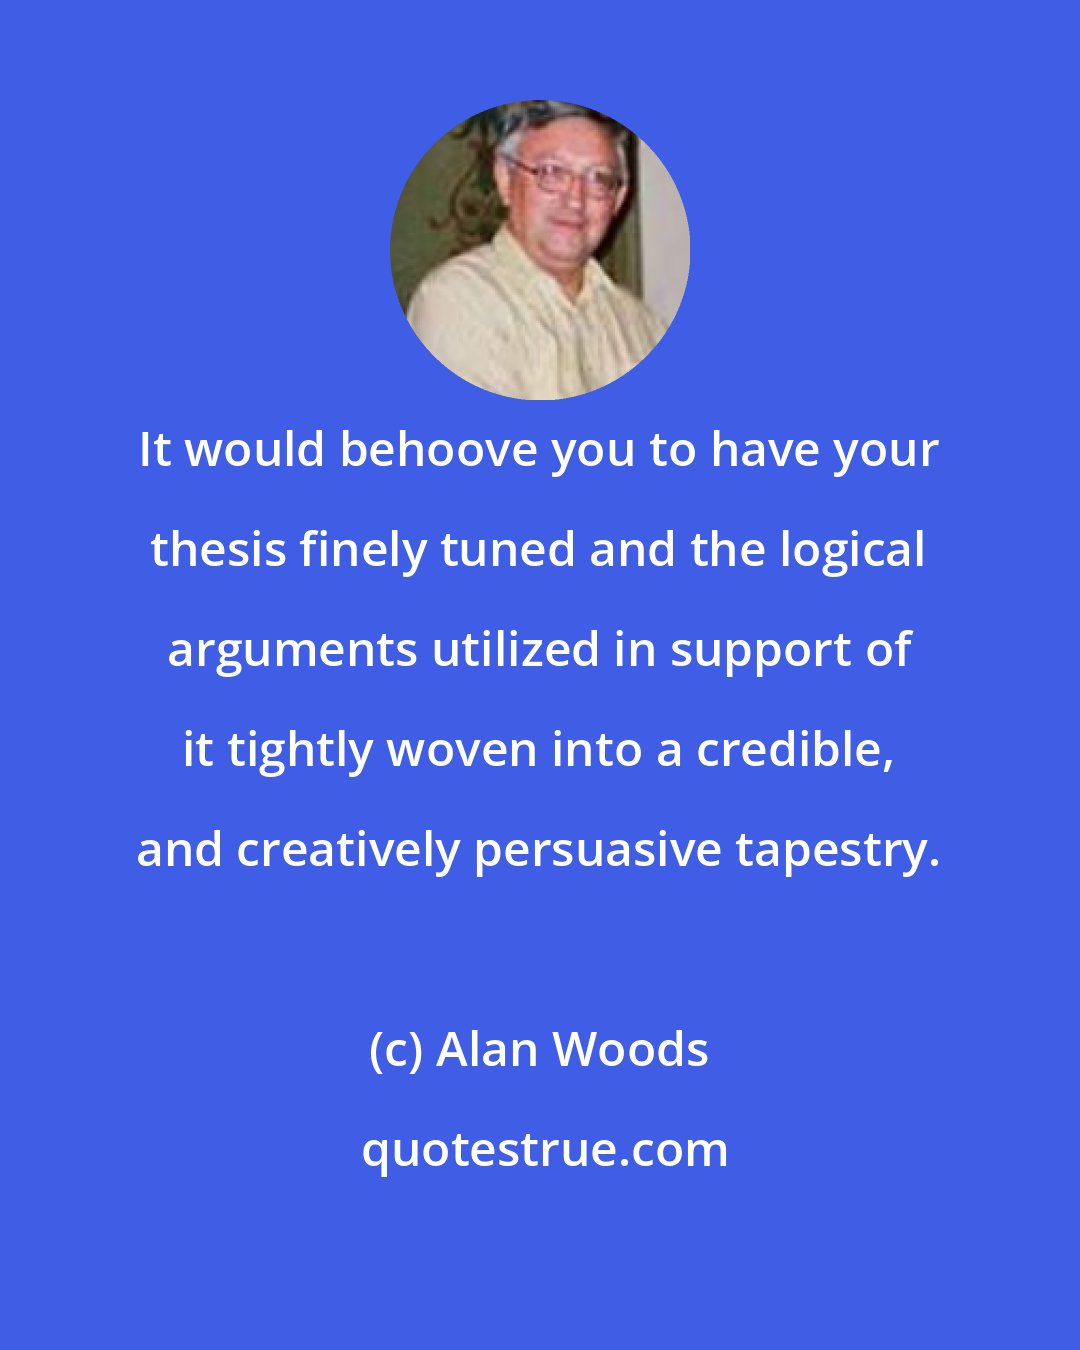 Alan Woods: It would behoove you to have your thesis finely tuned and the logical arguments utilized in support of it tightly woven into a credible, and creatively persuasive tapestry.